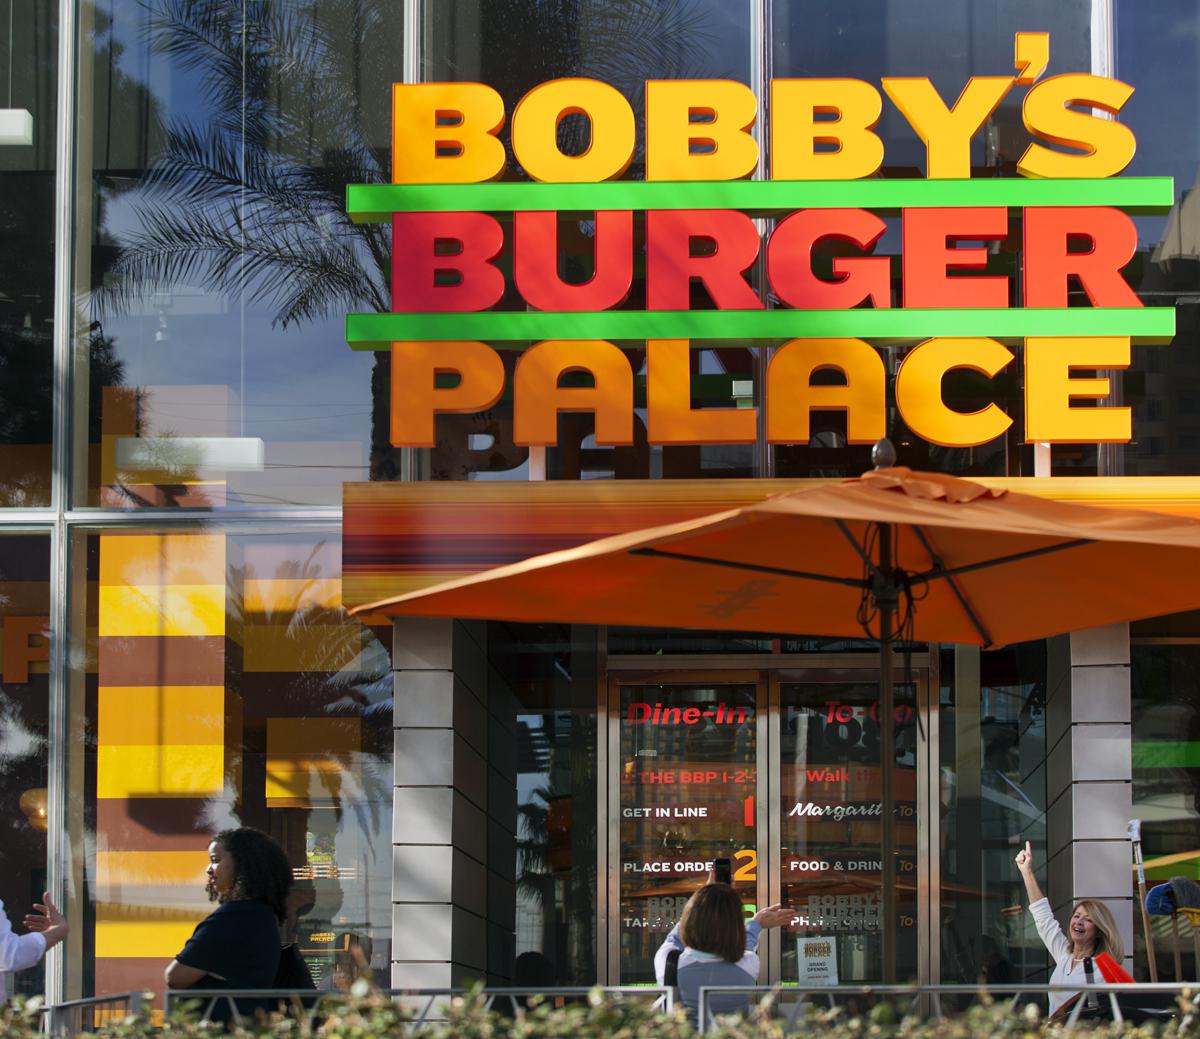 Bobbys Burger Palace menu prices featuring 72 items ranging from $0.42 to $13.50